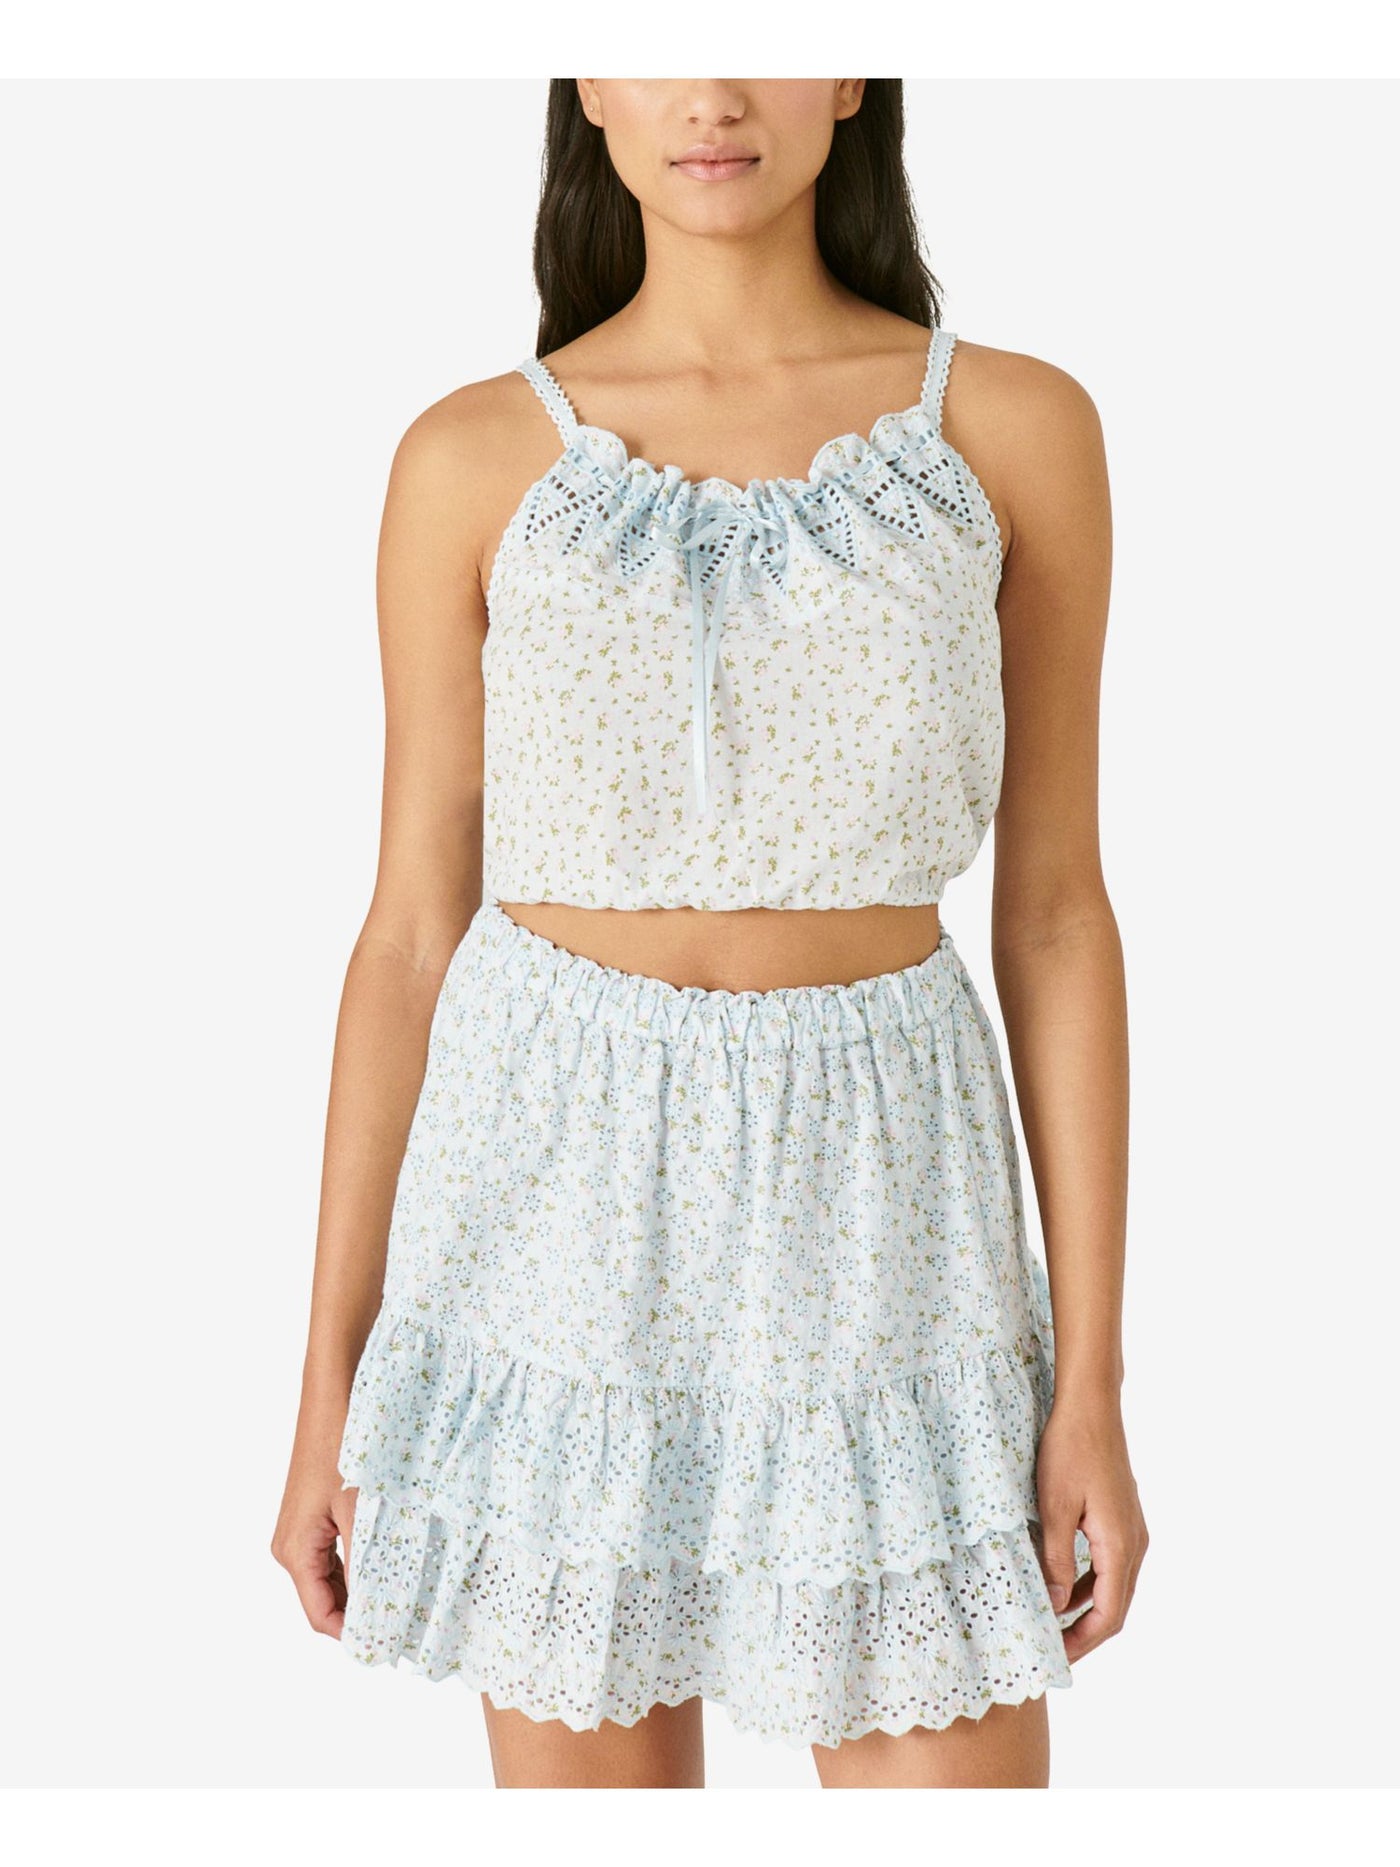 LUCKY BRAND Womens Light Blue Embroidered Cropped Drawstring Elastic Hem Floral Sleeveless Scoop Neck Cami Top M